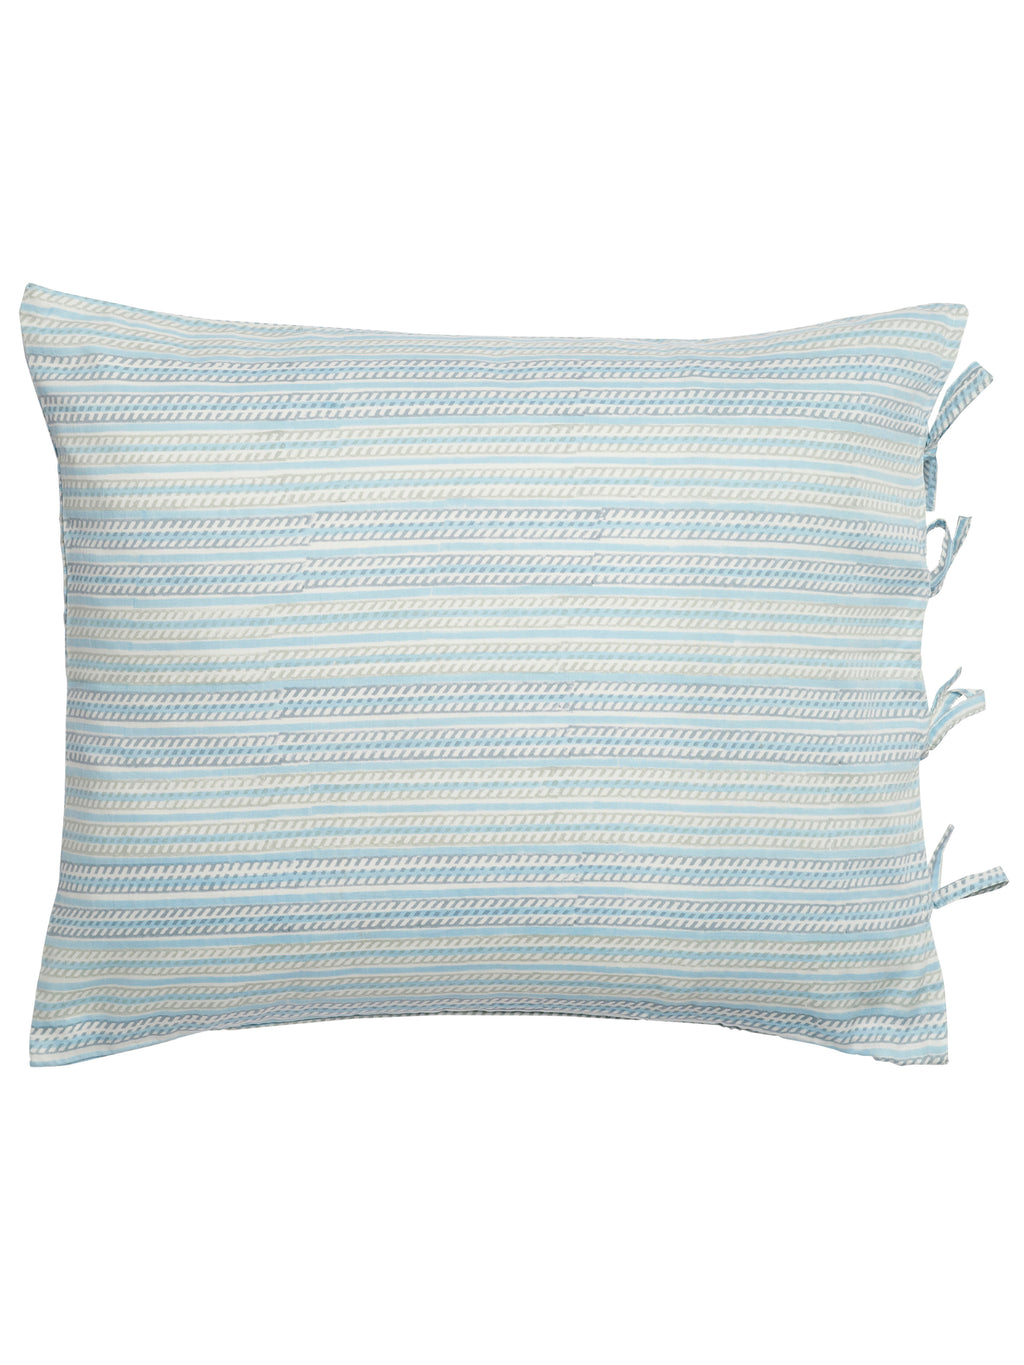 Pillowcases with Stripe print in Blue